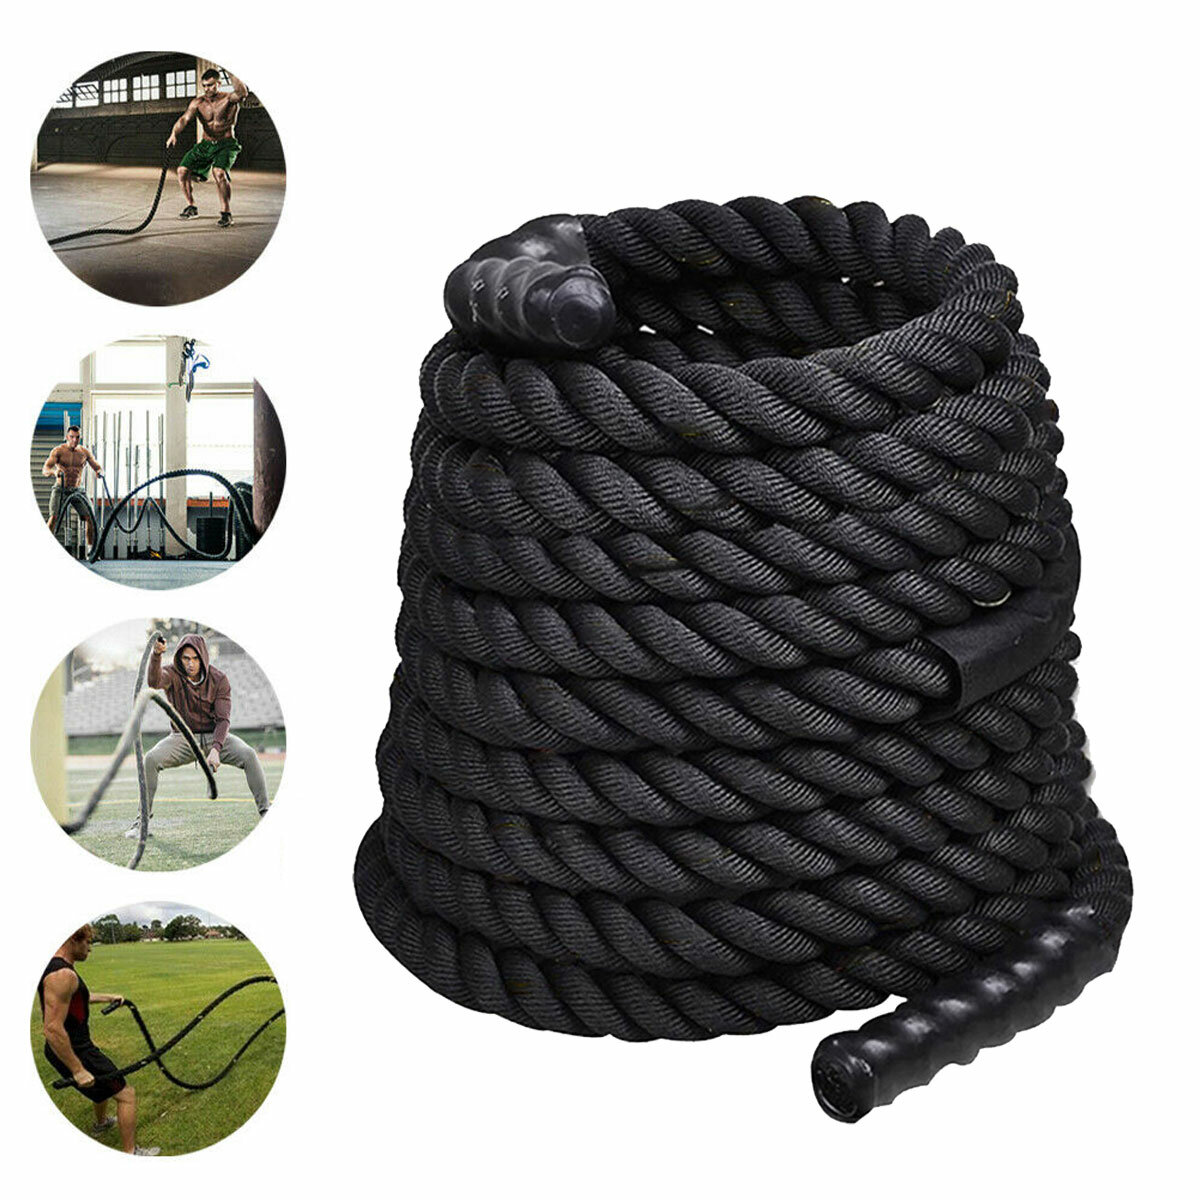 9M Length Fitness Battle Rope Heavy Jump Rope Weighted Battle Skipping Ropes Retainer Gym Exercise Tools